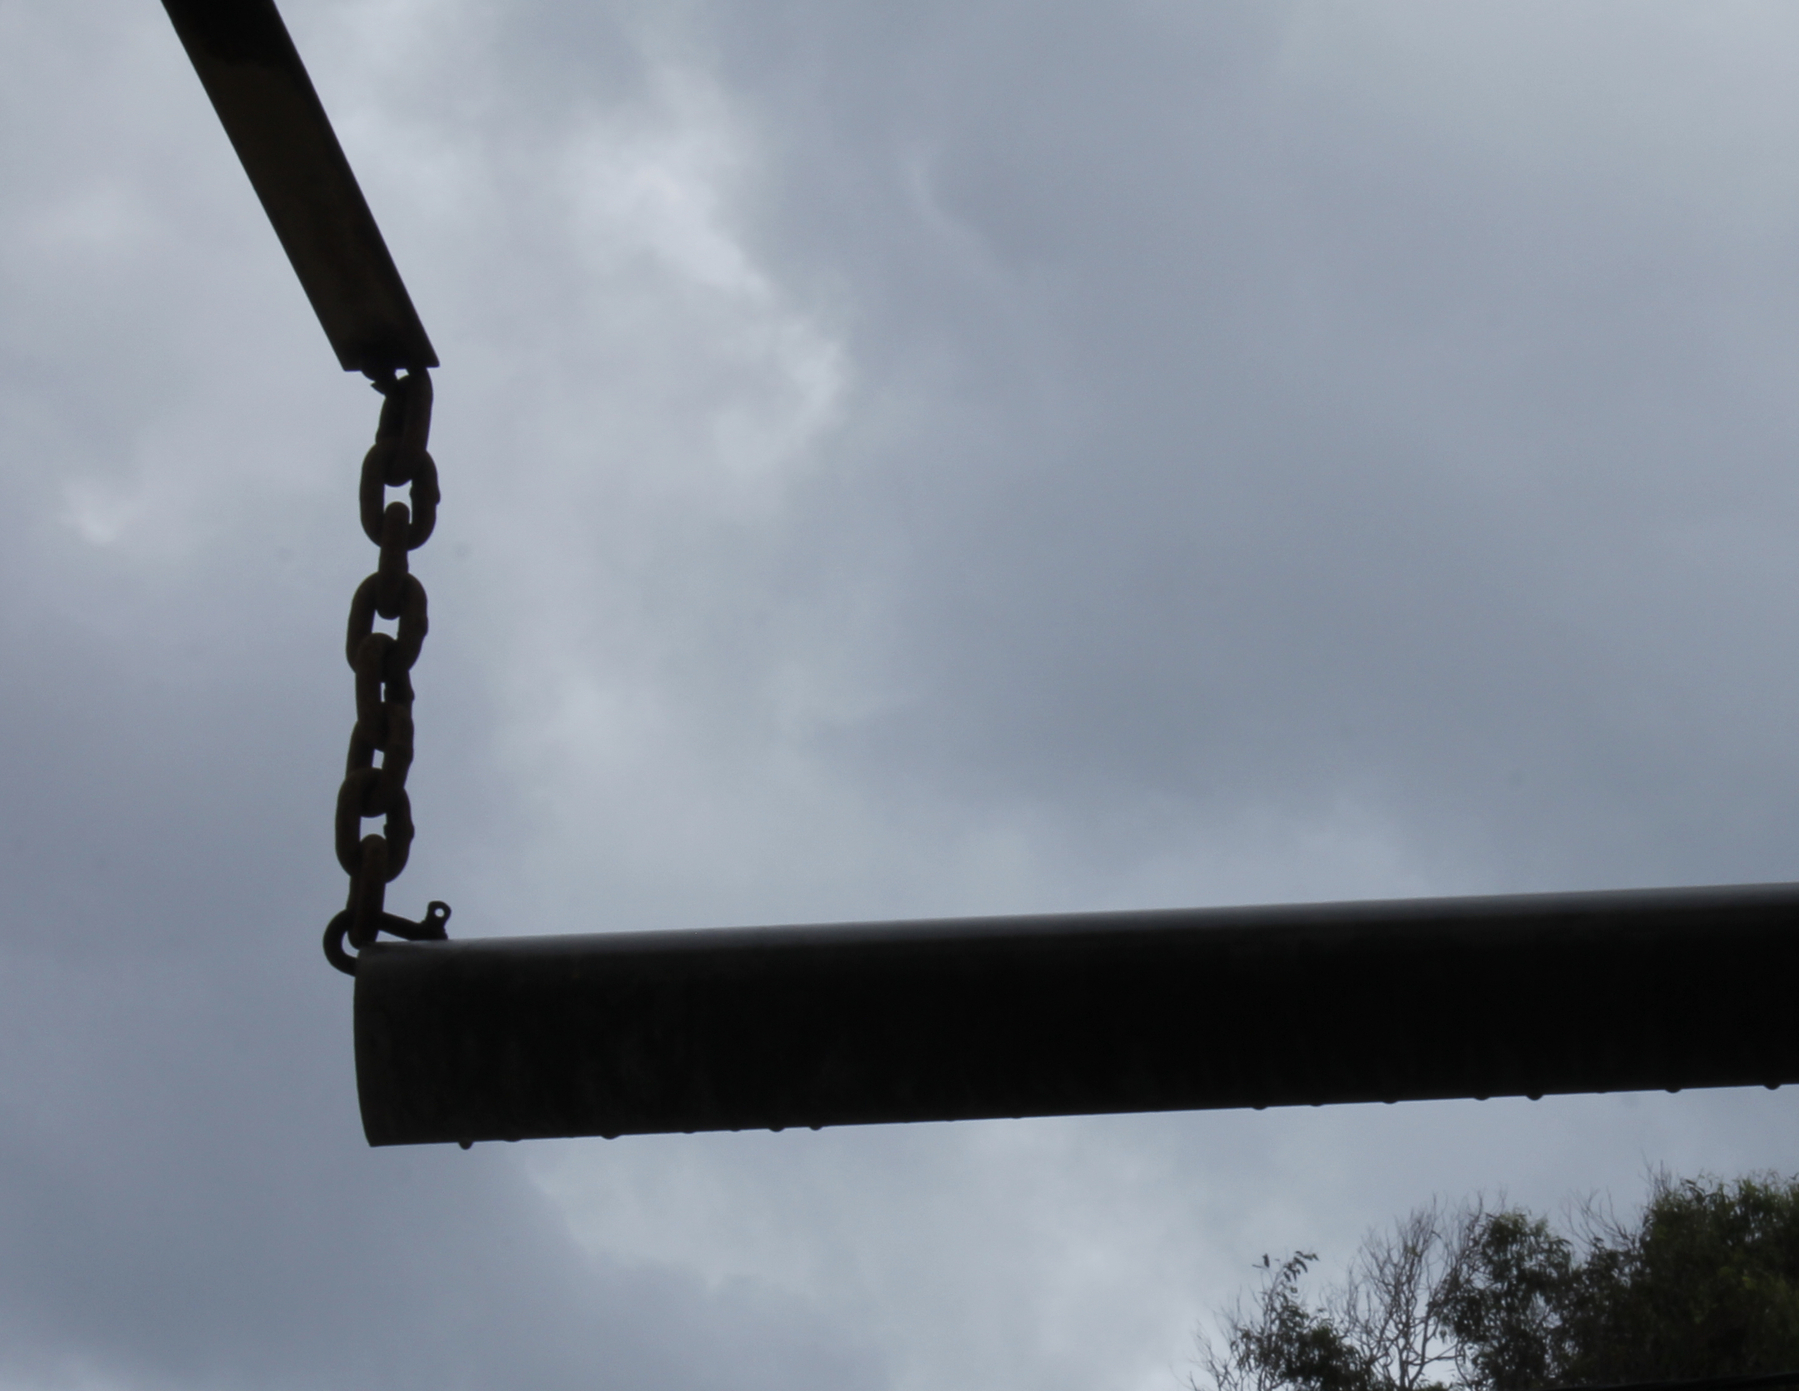 A horizontal pipe is silhouetted against a sky of dark grey storm clouds. The pipe hangs from a short chain, which in turn is suspended from a metal bracket near the top left corner. The chain and bracket are also in silhouette. The bracket, chain and pipe are part of a low-tech mechanism to warn drivers if their vehicle is too high to enter the space beyond.